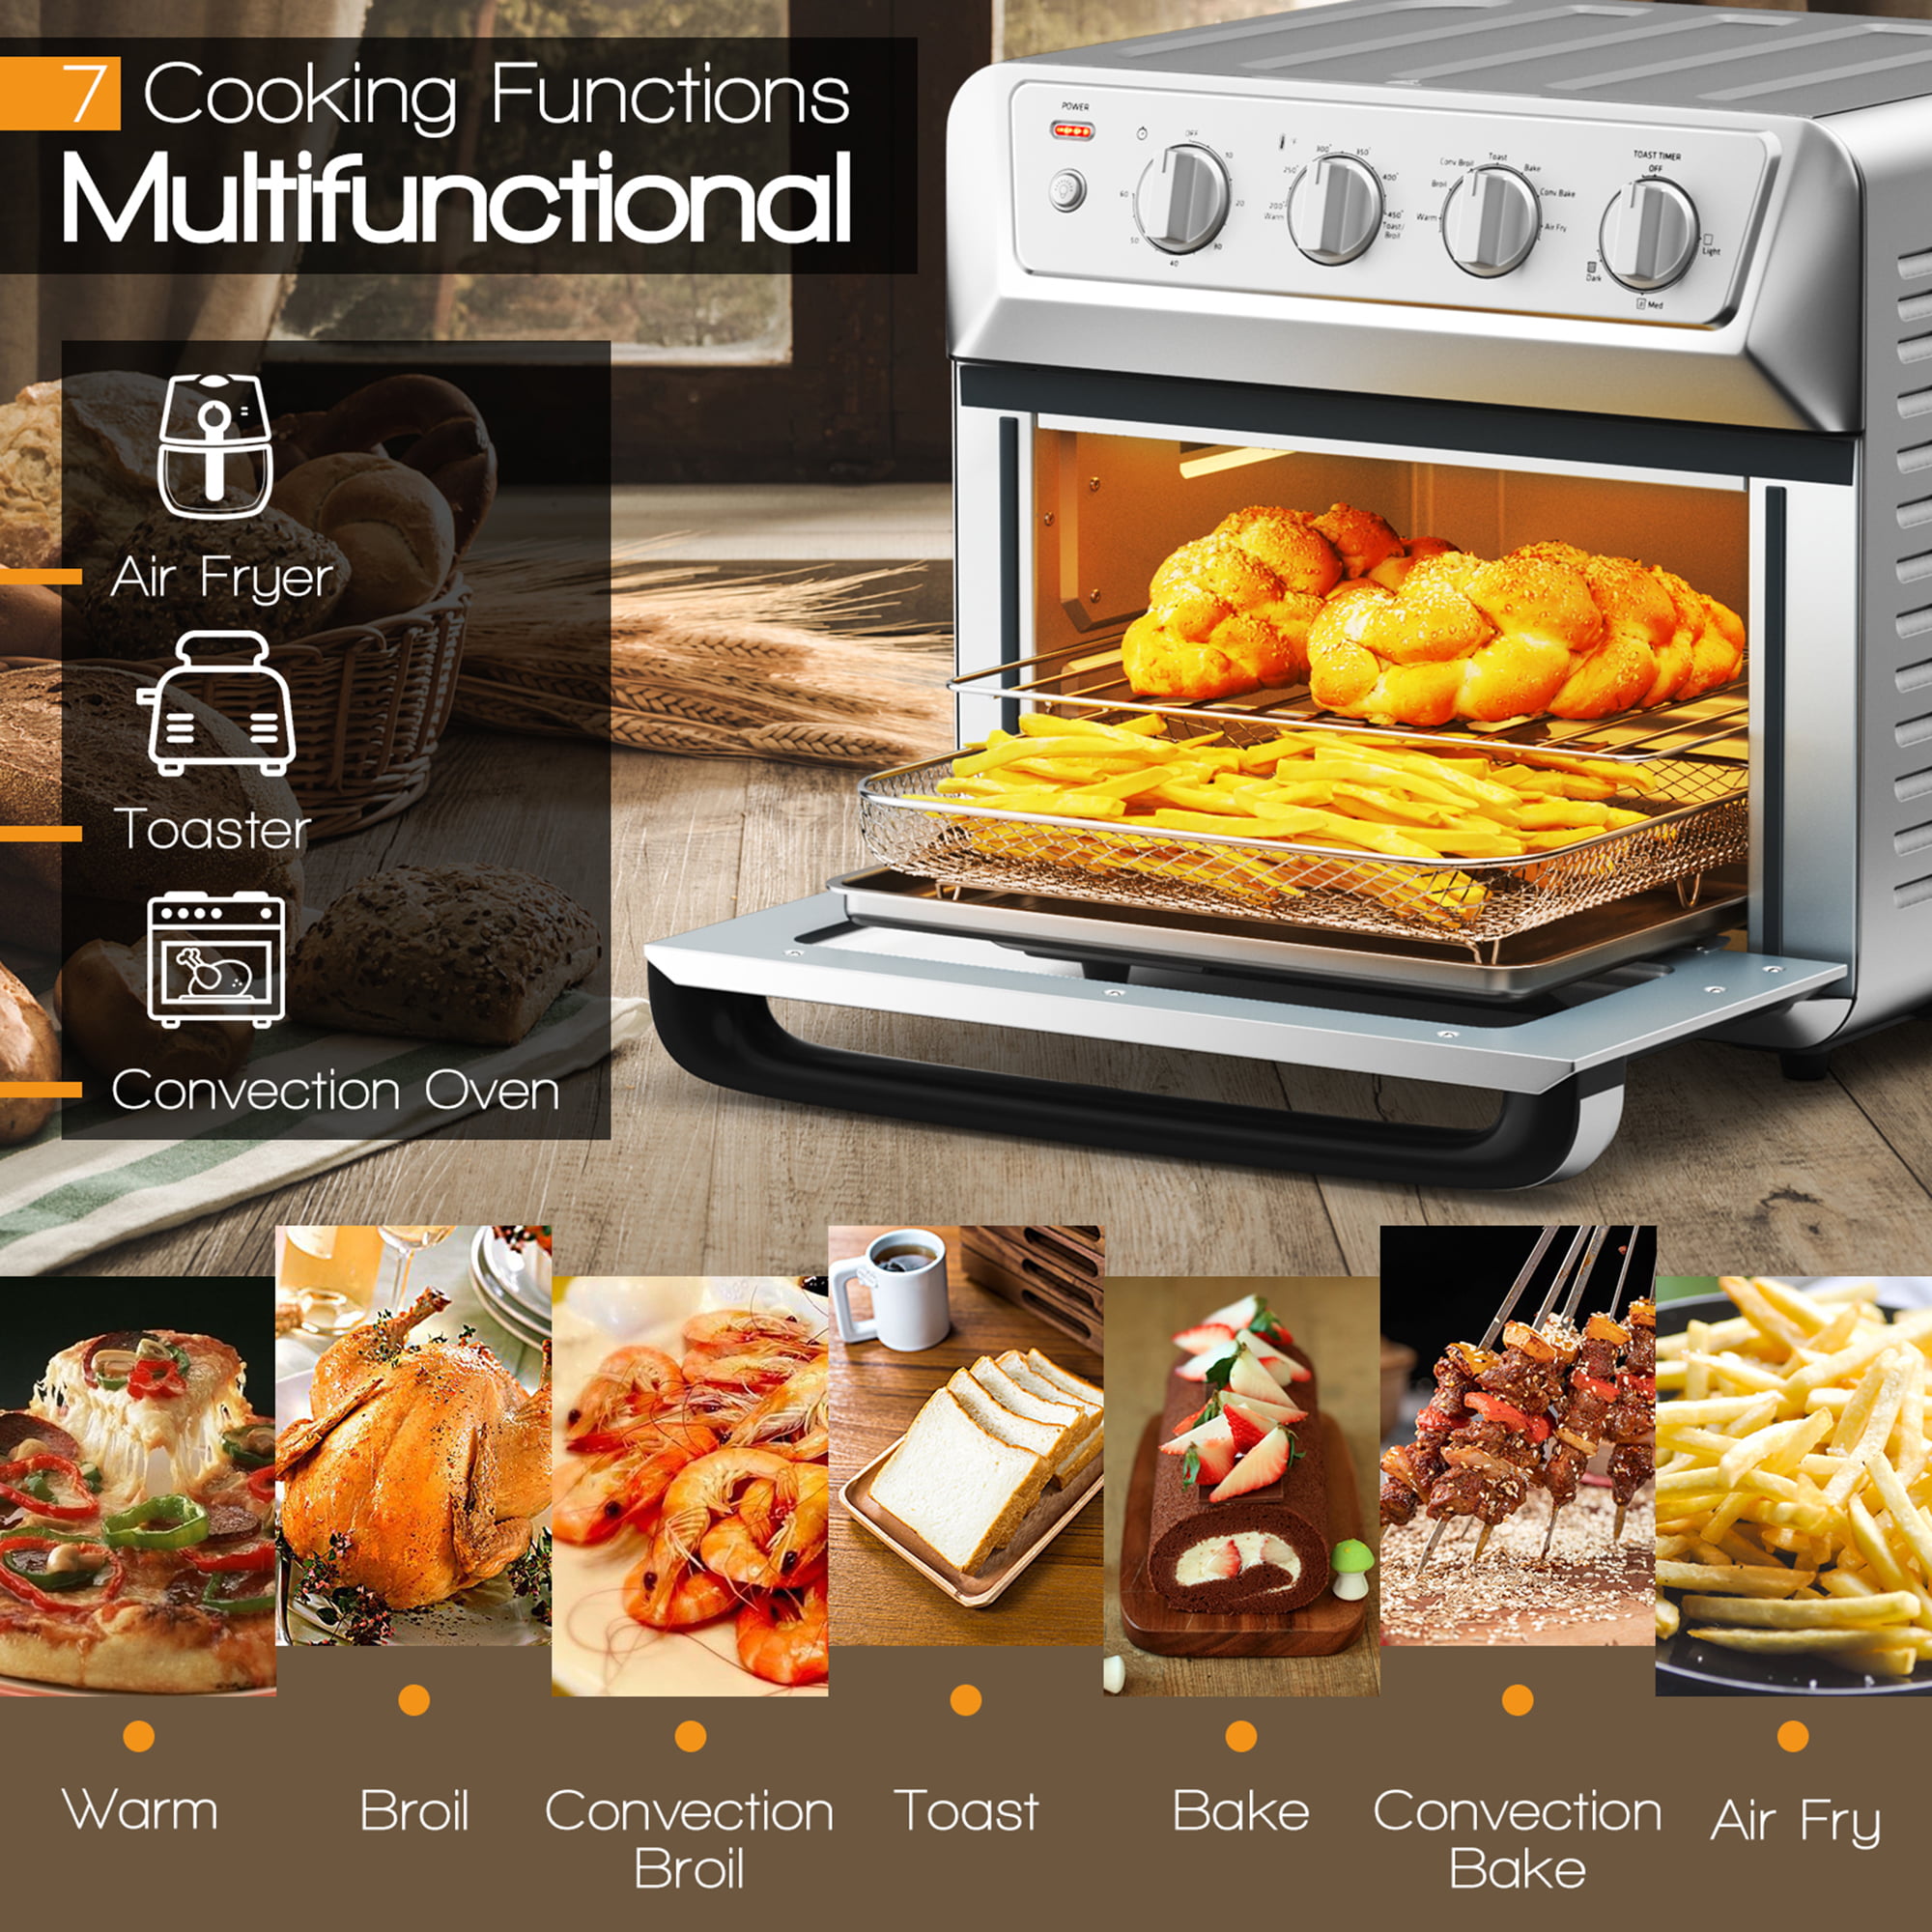  JOYAMI Air Fry Countertop Oven, 18QT Convection Oven and Indoor  Grill Combo with See-Through Window for Air Fry, Bake, Dehydrate, Toast, 6  Nonstick Accessories, 1600W : Home & Kitchen